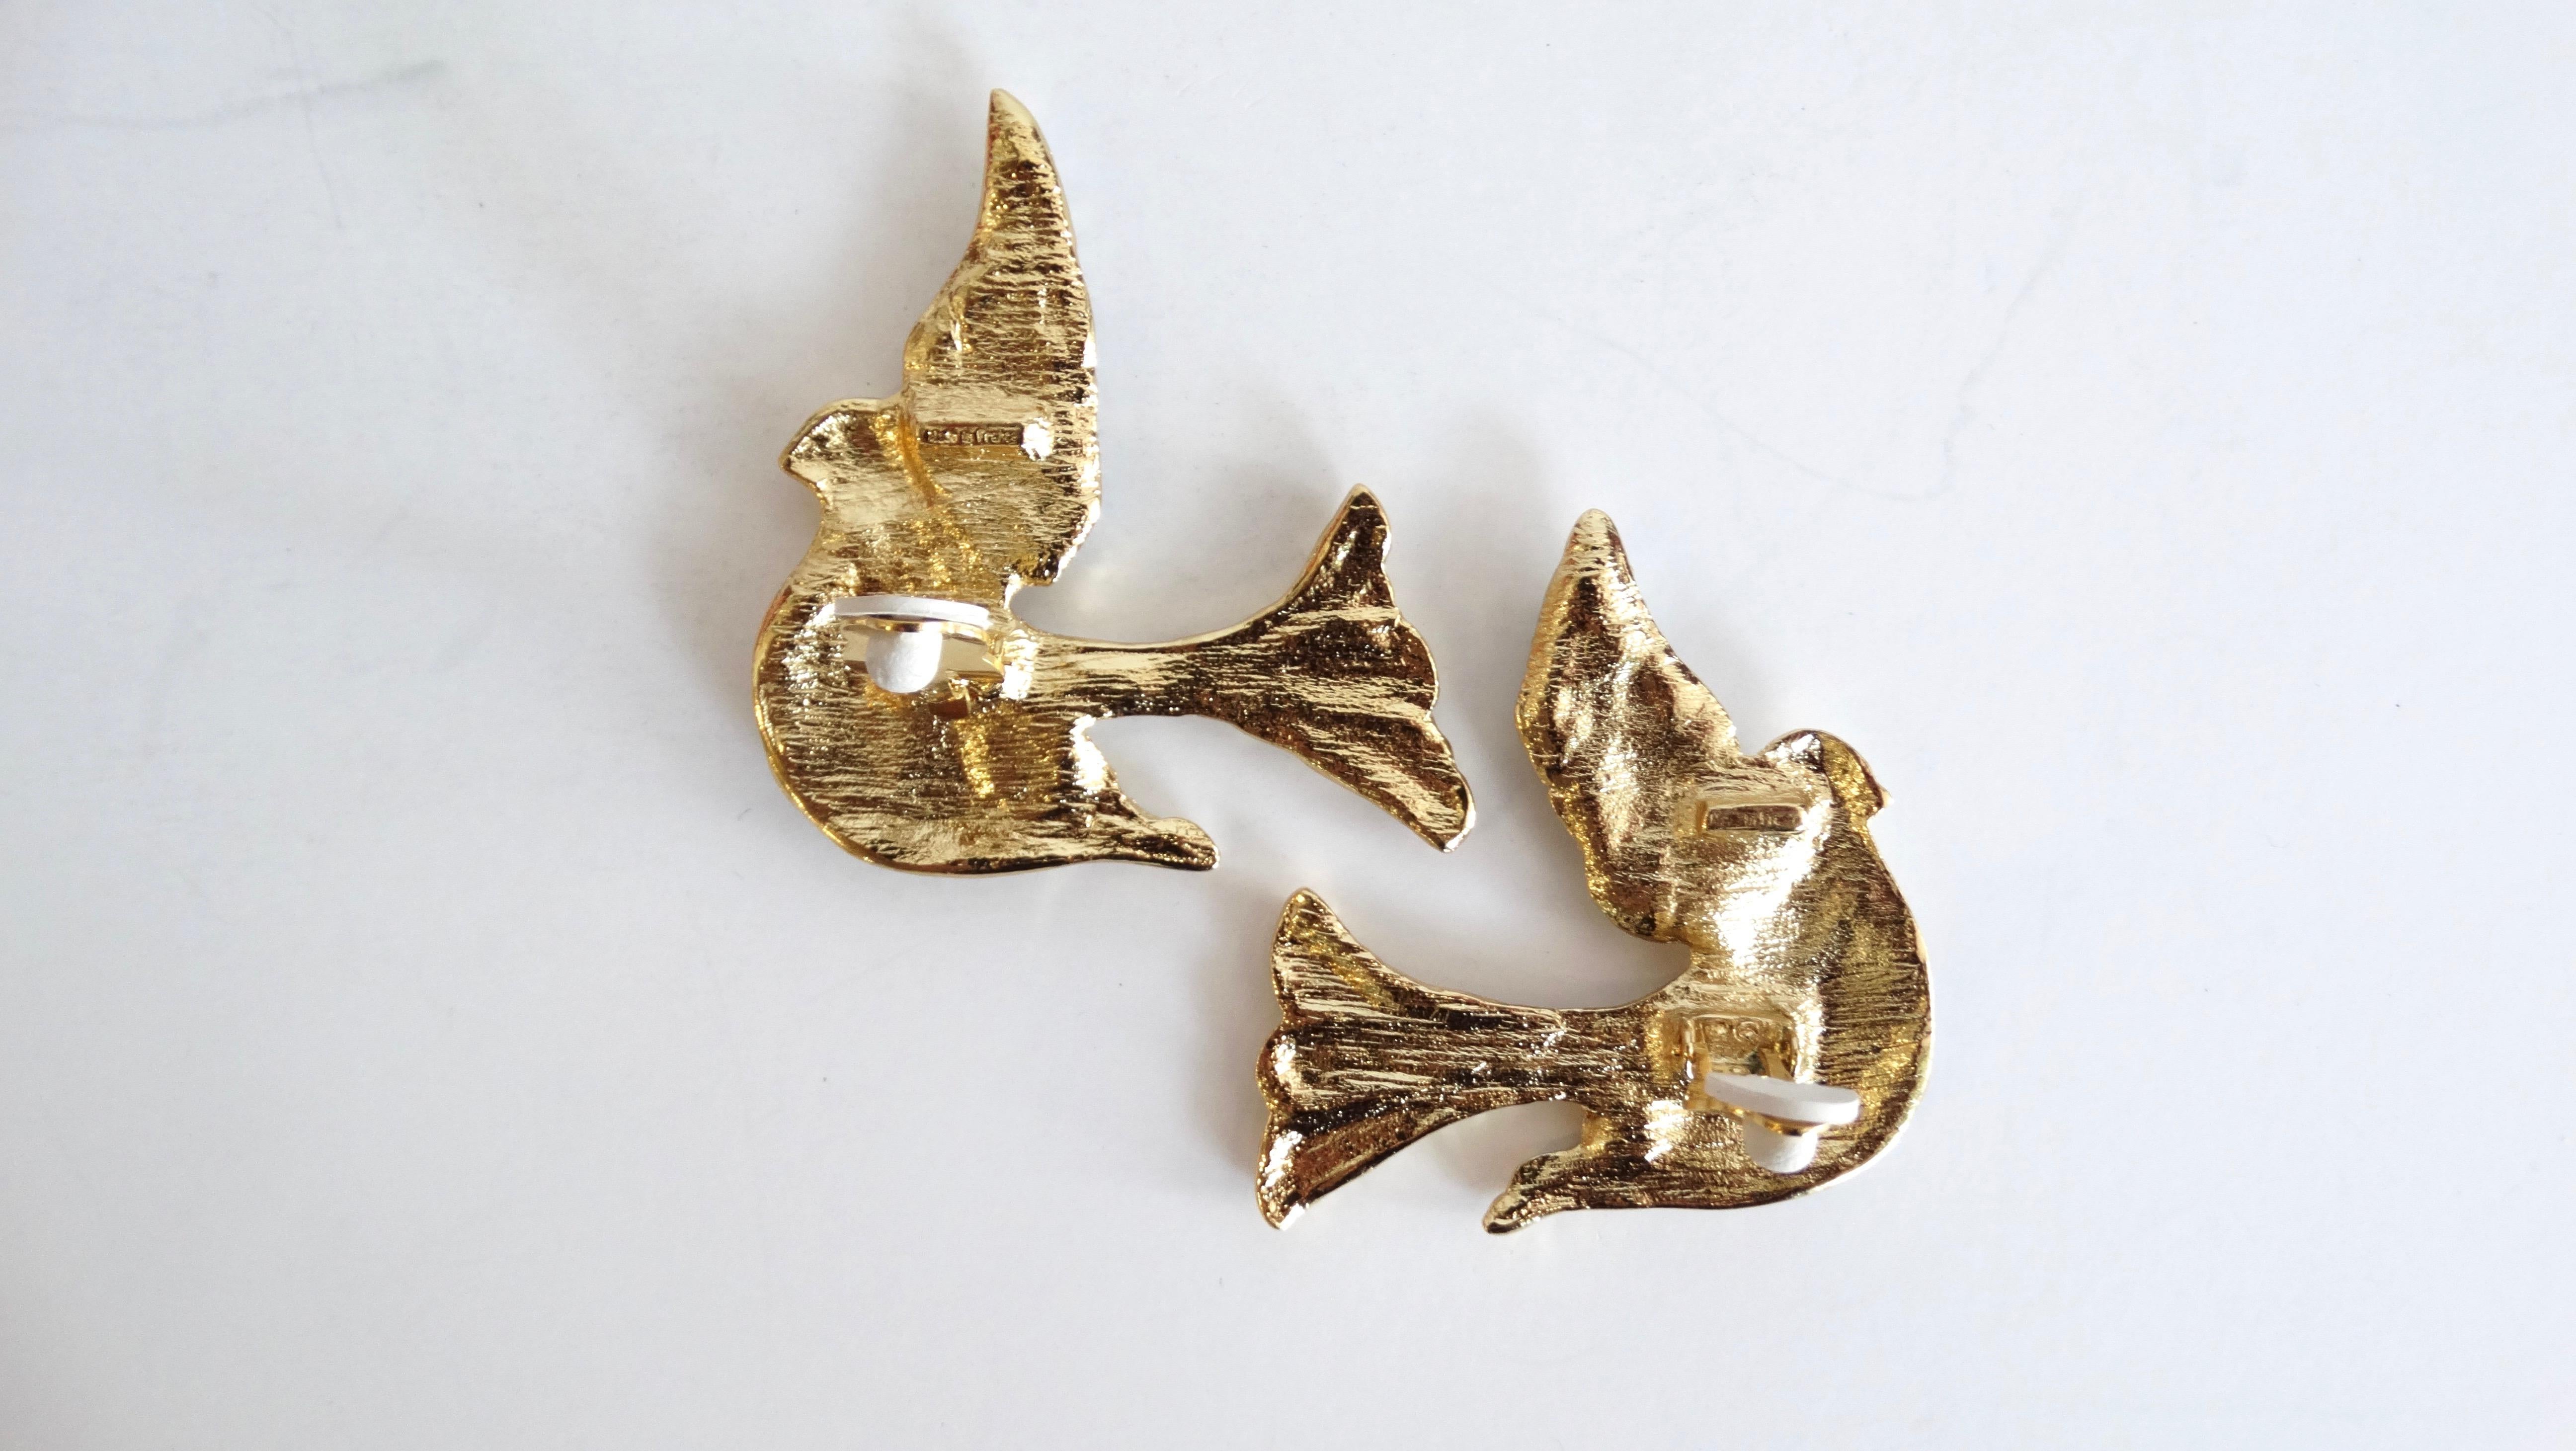 Add some vintage to your jewelry box with our bedazzled bird earrings from 1980s Yves Saint Laurent! Gold flying sparrows embellished with stripes of blue rhinestone crystals! Clip on style backs, each signed YSL. 